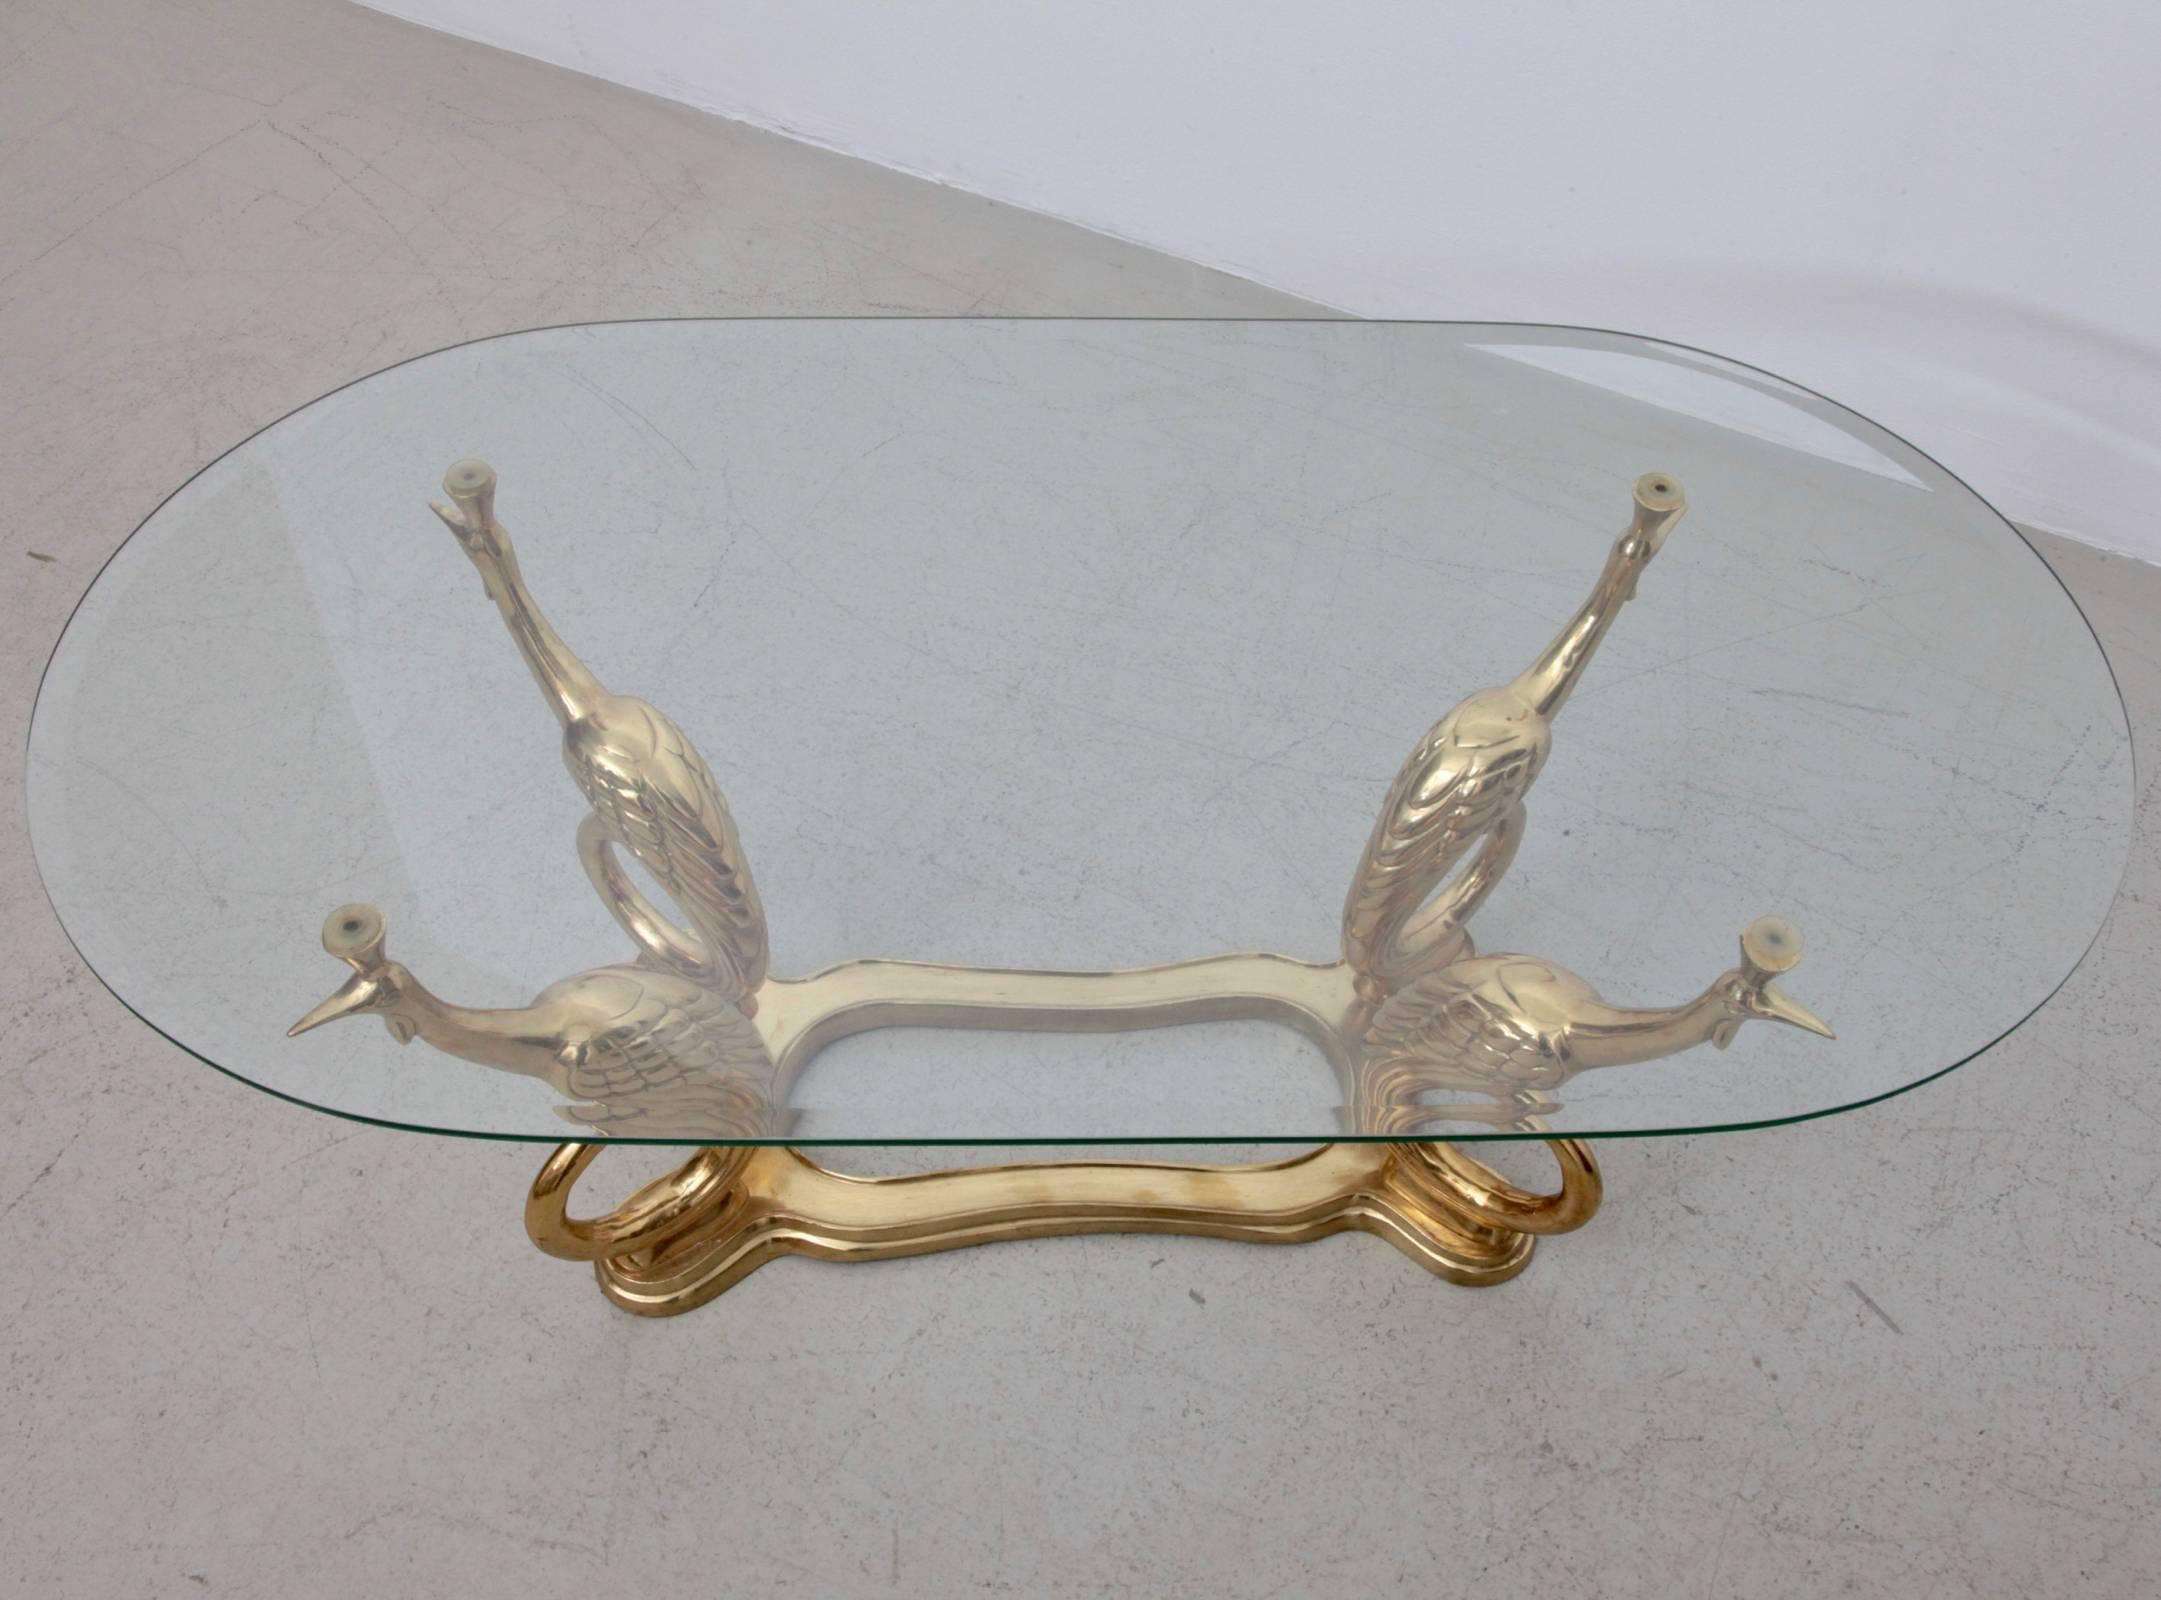 Very elegant coffee or side table in brass and glass. The mint glass tabletop is holded by four peacocks. The table is a real eyecatcher. The same table in another form is also listed.

